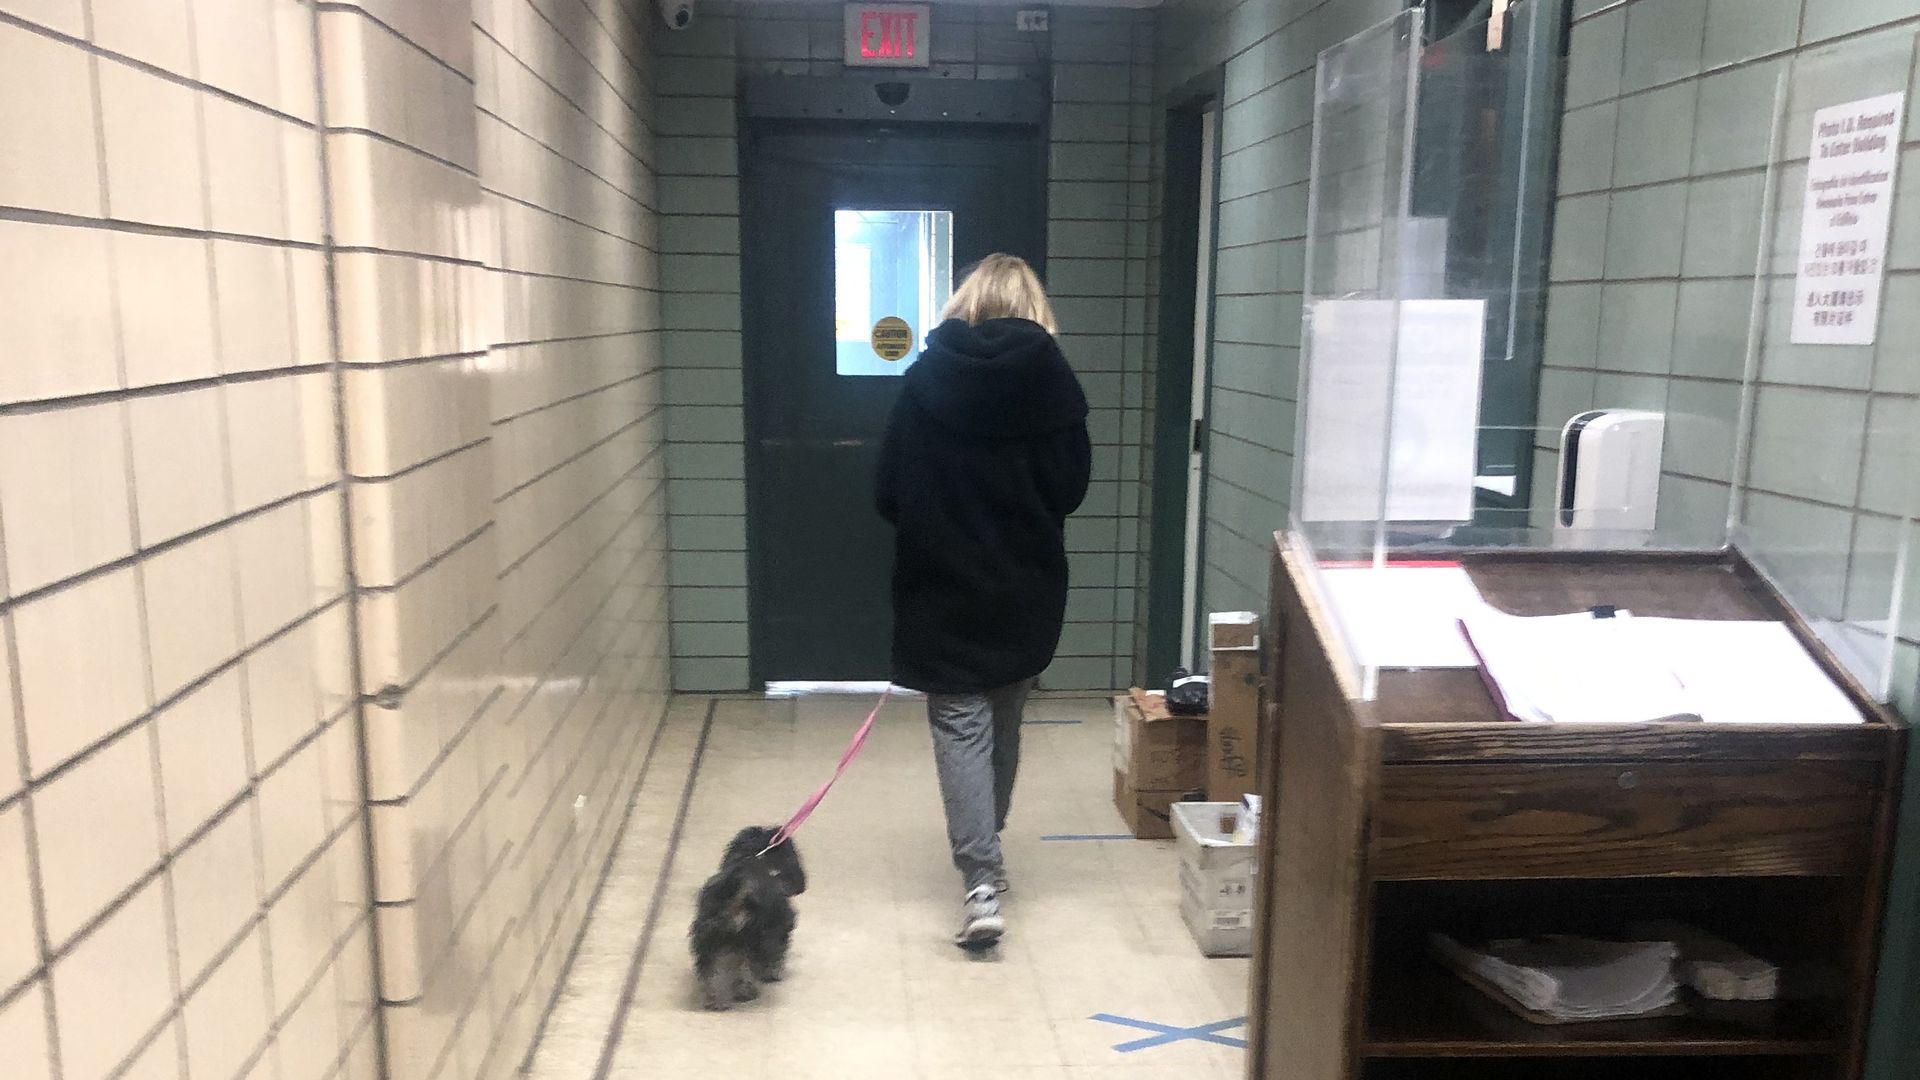 An emotional support dog leaving an apartment building.